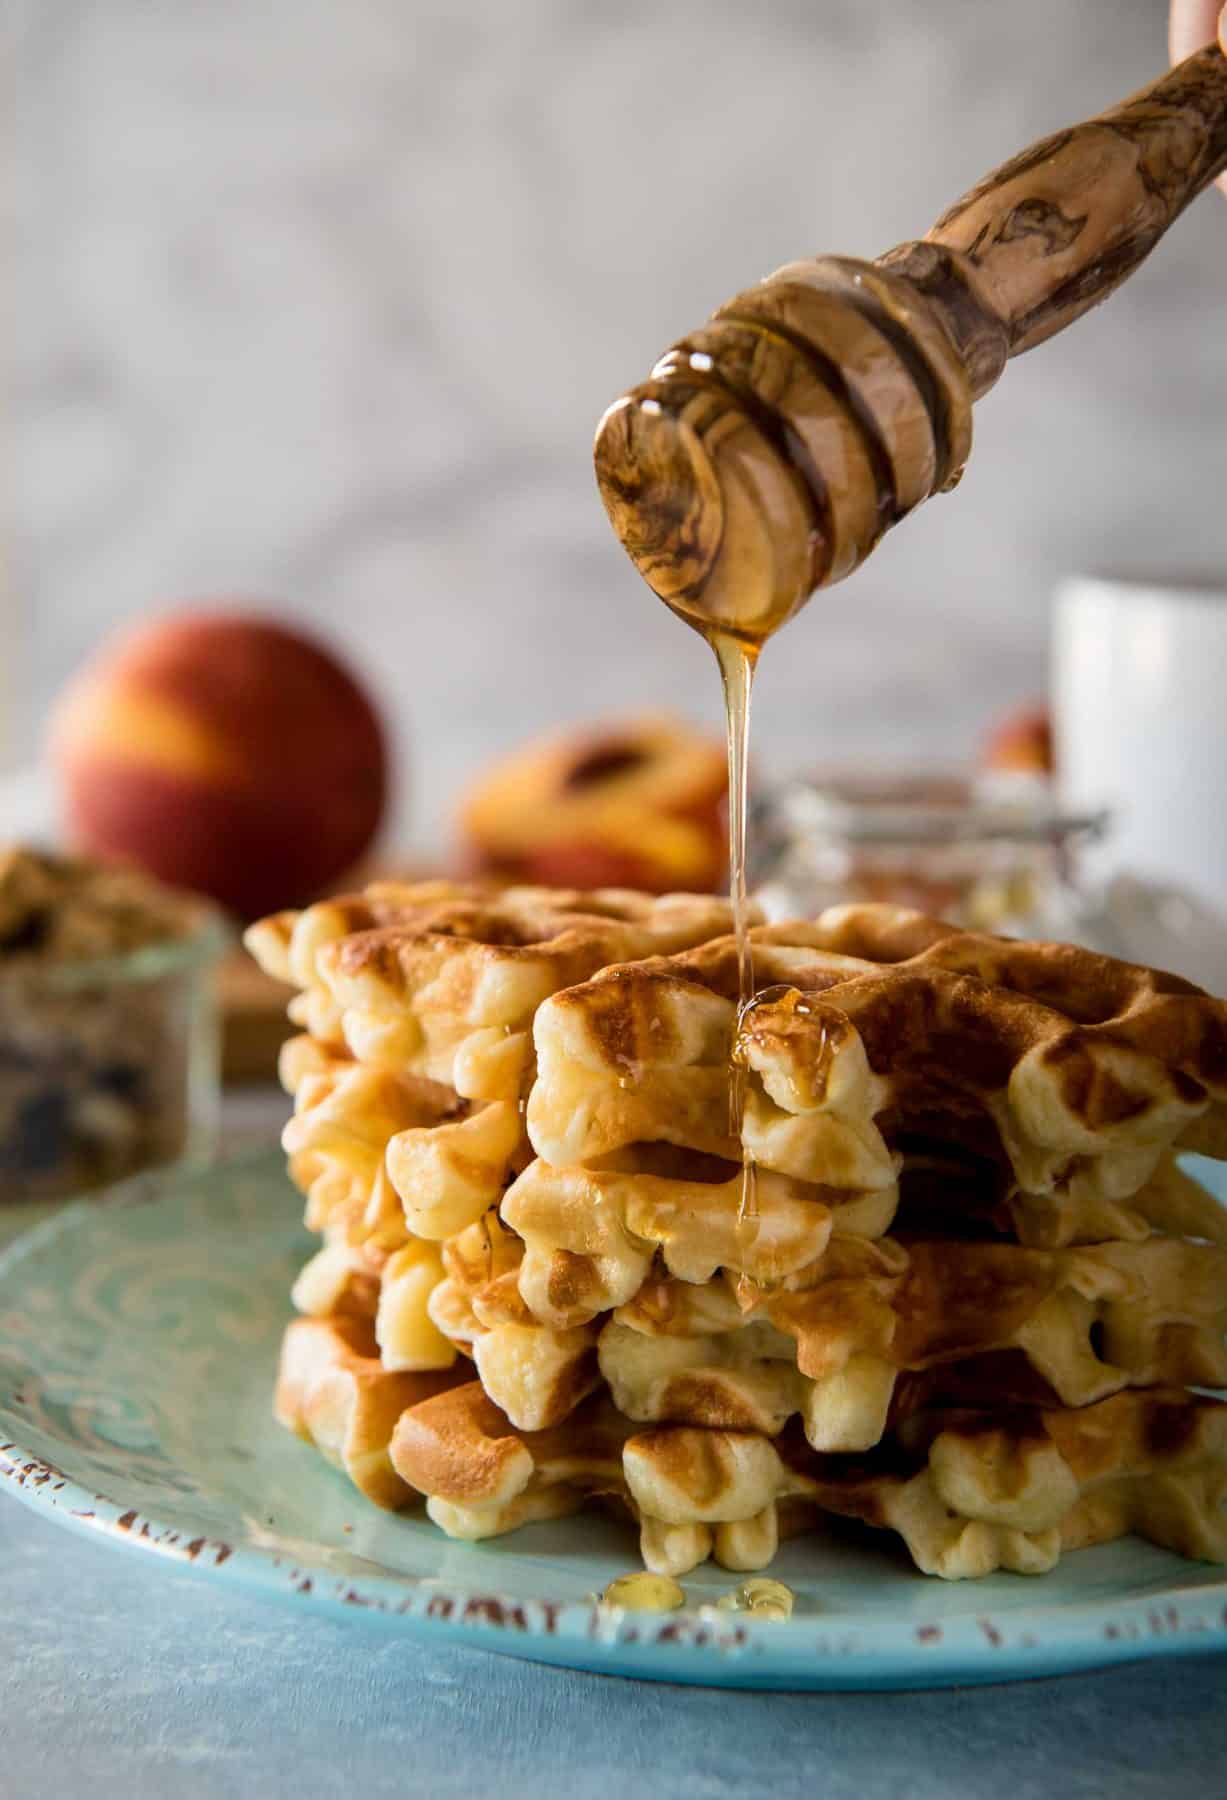 These deliciously easy Peach Cobbler Waffles with Honeyed Yogurt should be on your breakfast menu this weekend! Buttermilk waffles, lightly sweetened with yogurt & fresh peaches, then stacked and topped with honeyed yogurt and granola - nothing says summer quite like these!